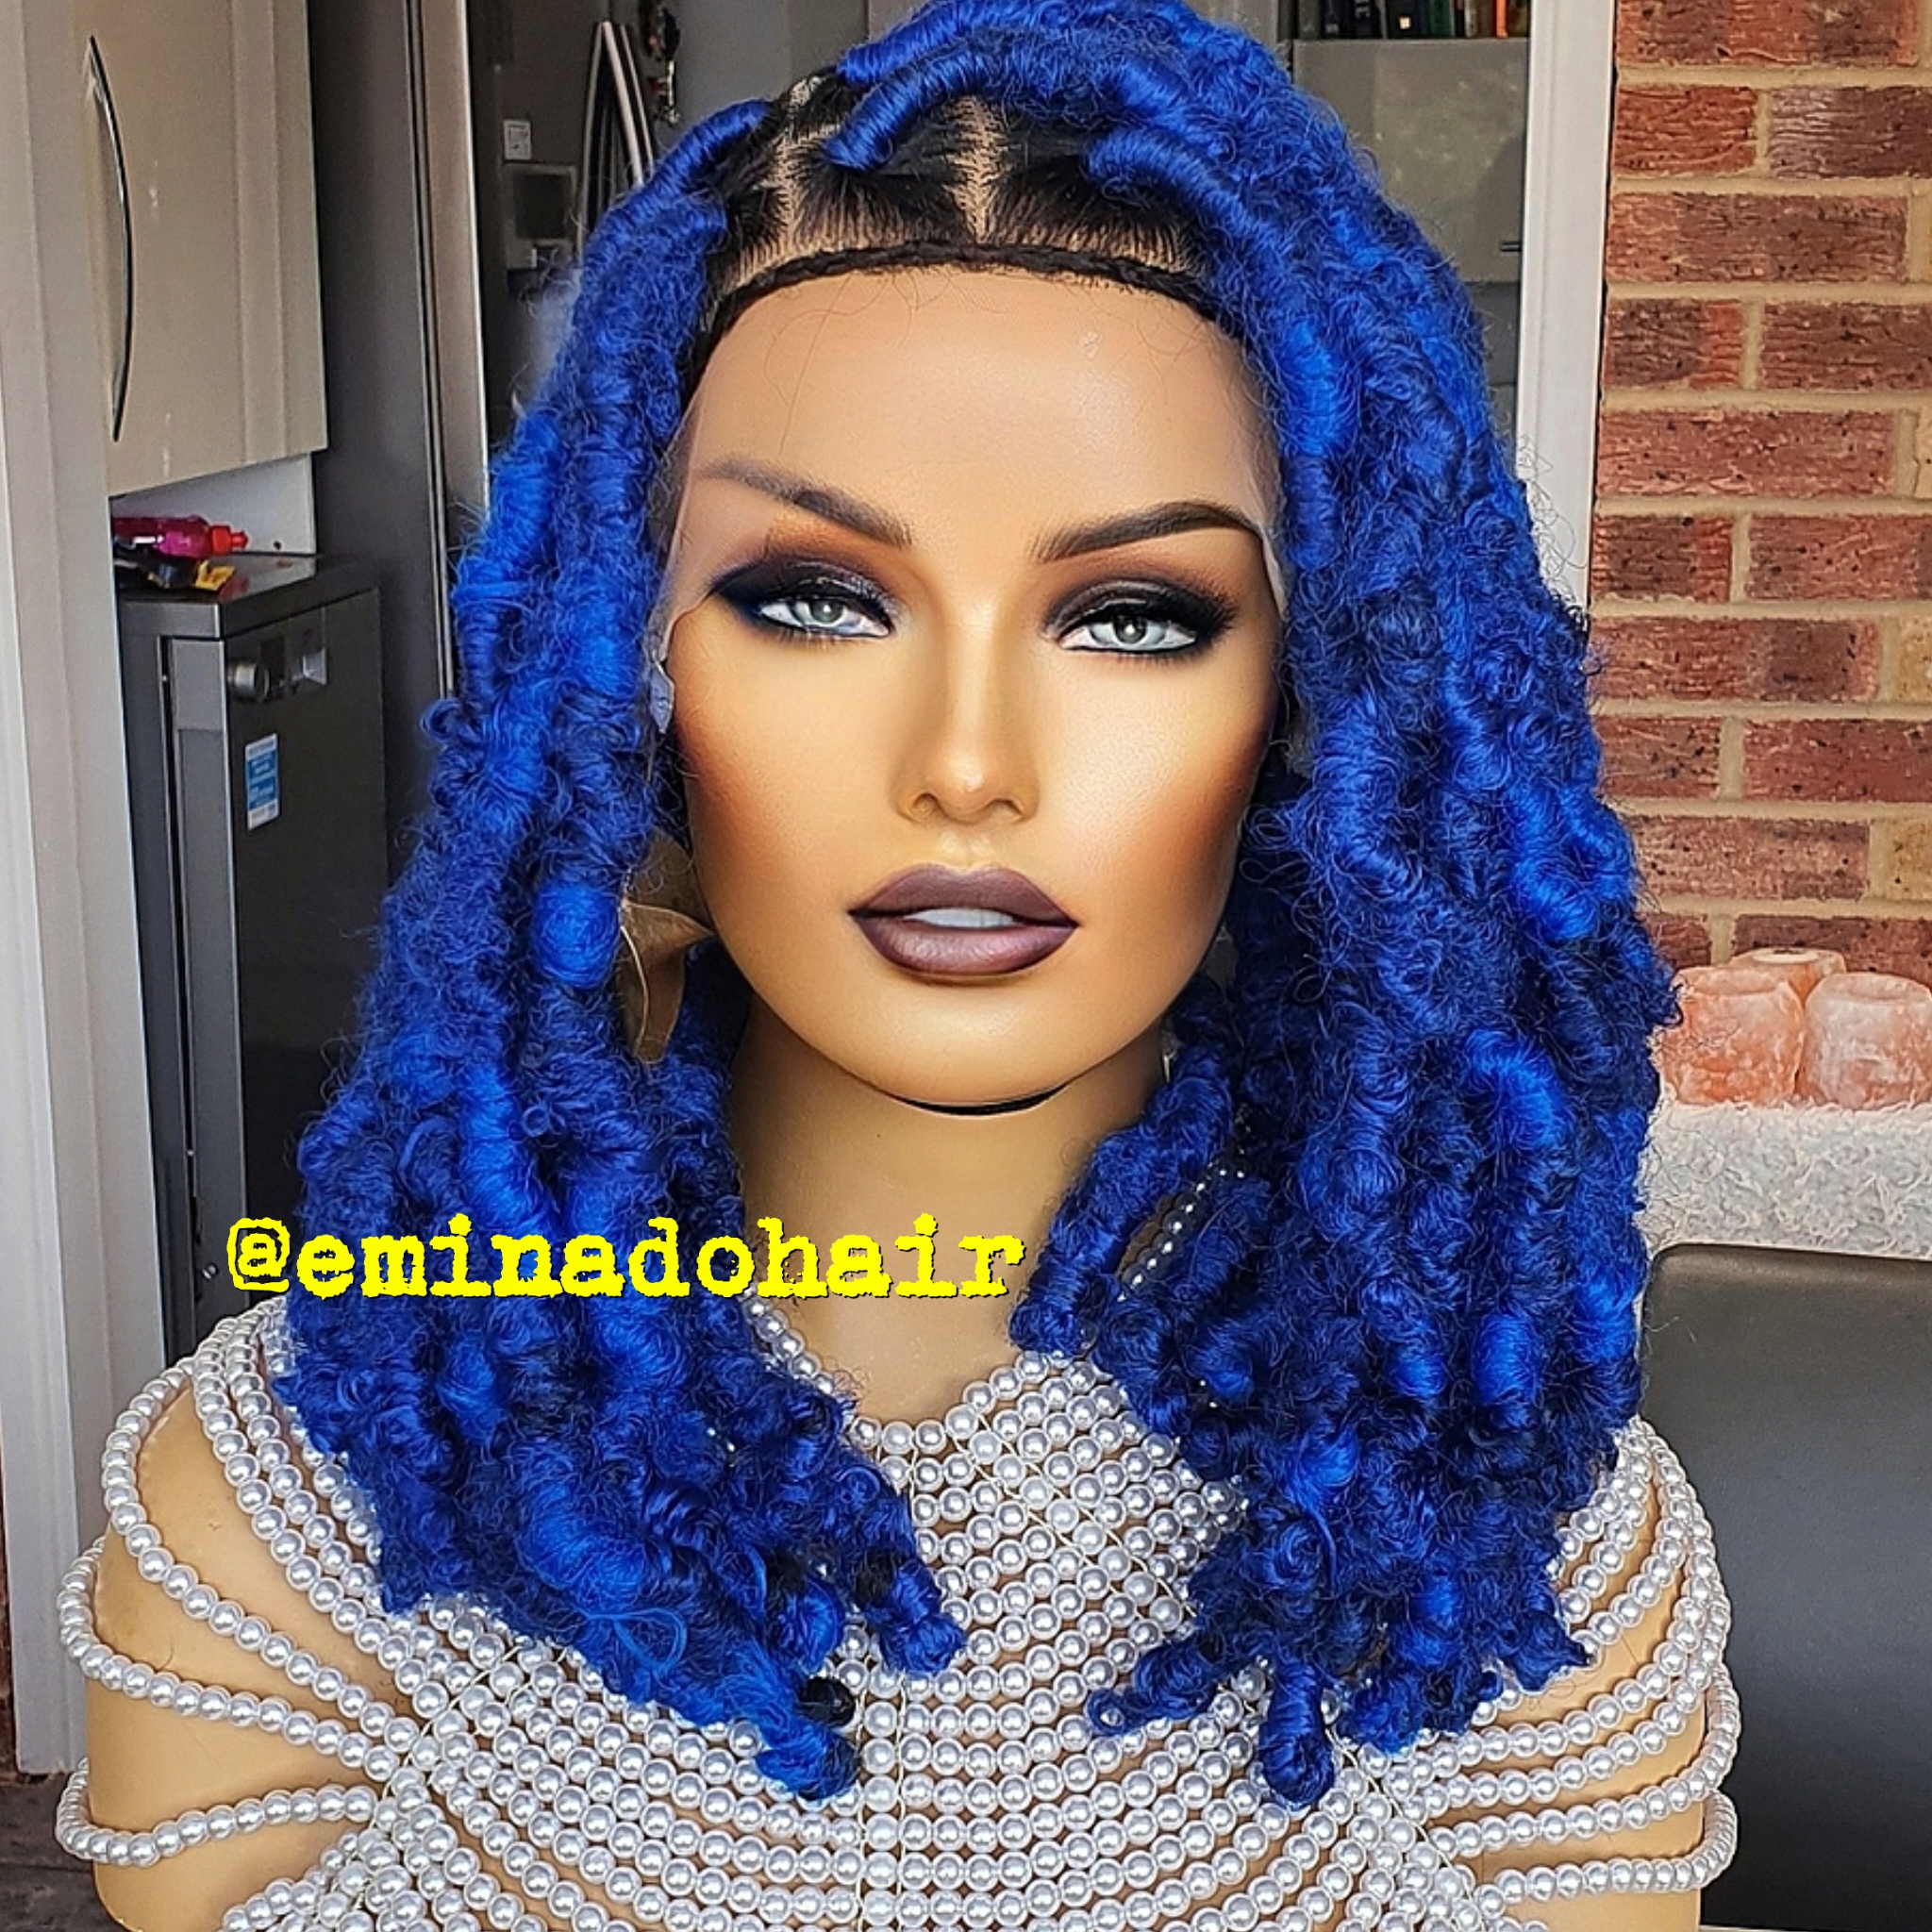 Butterfly Locs Braided Wigs For Black Women Full Double Lace Twist Locs  Hair Wigs With Baby Hair 20IN Short Hair Wigs 1B-Blue lace braided